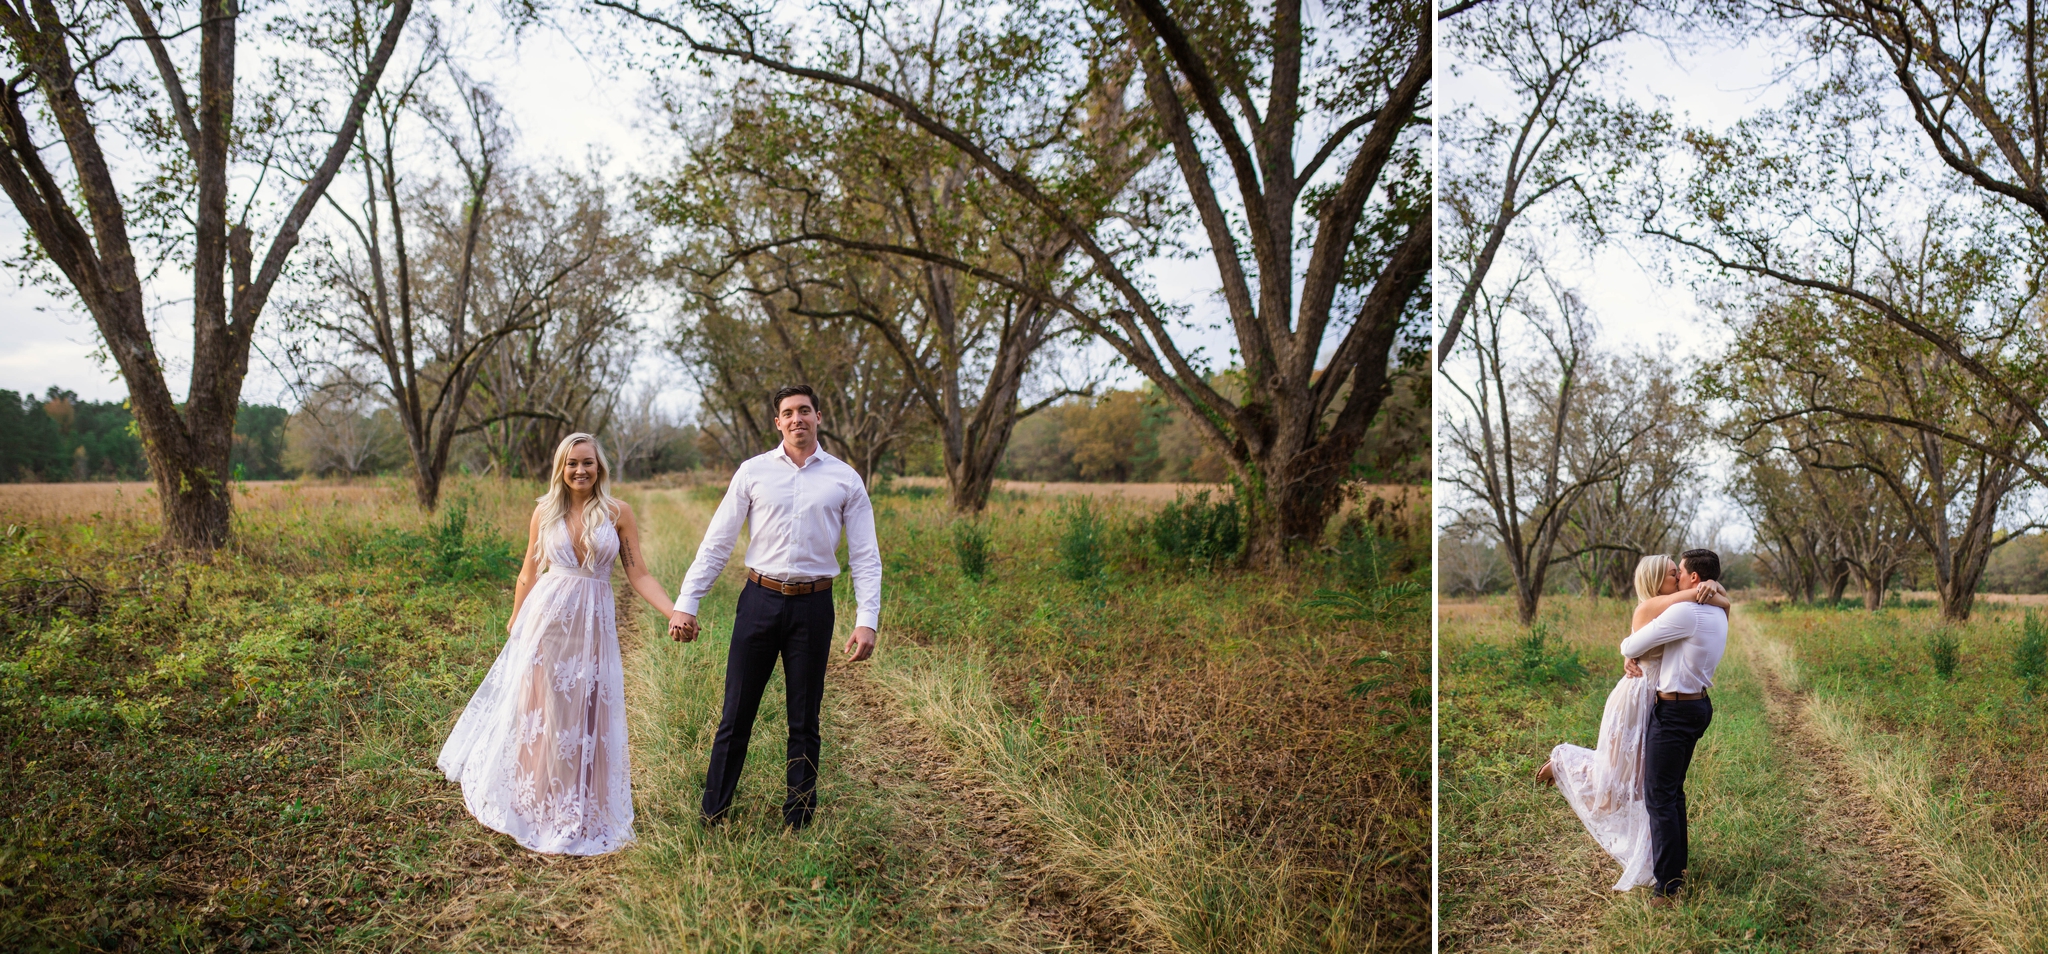 Couples photography in a Cornfield - Fayetteville North Carolina Engagement Photographer